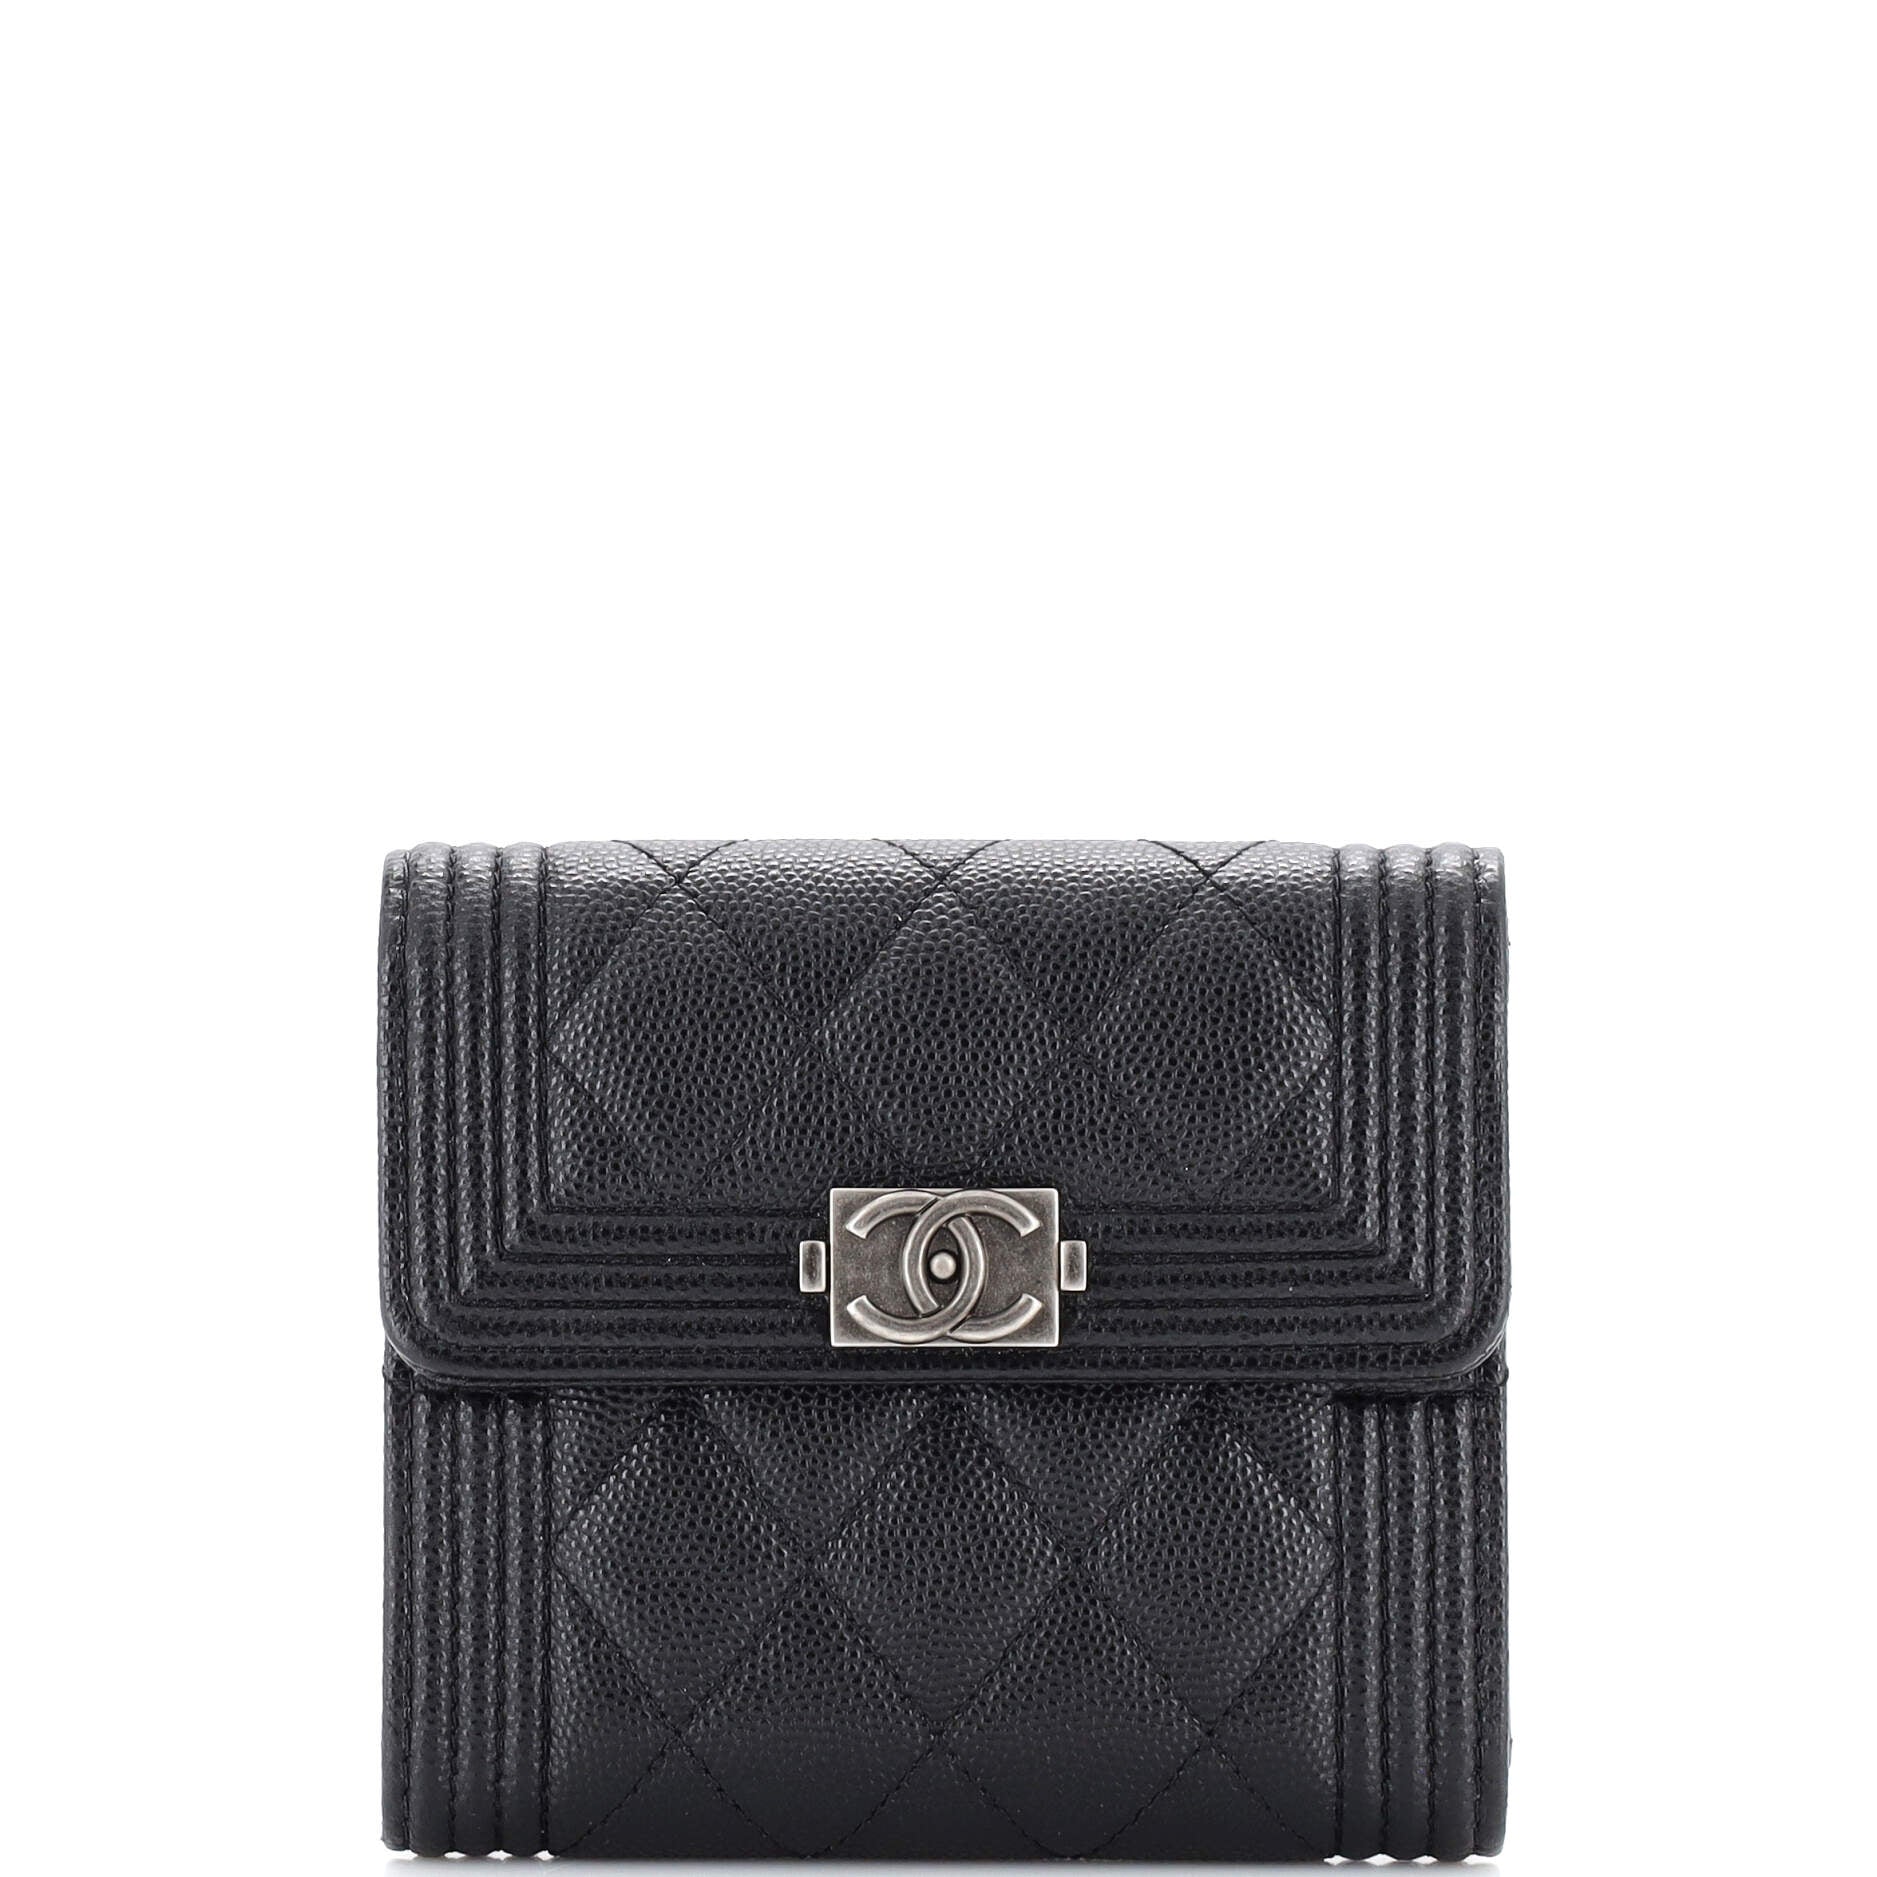 Chanel Black Quilted Caviar Leather Small Compact Flap Wallet